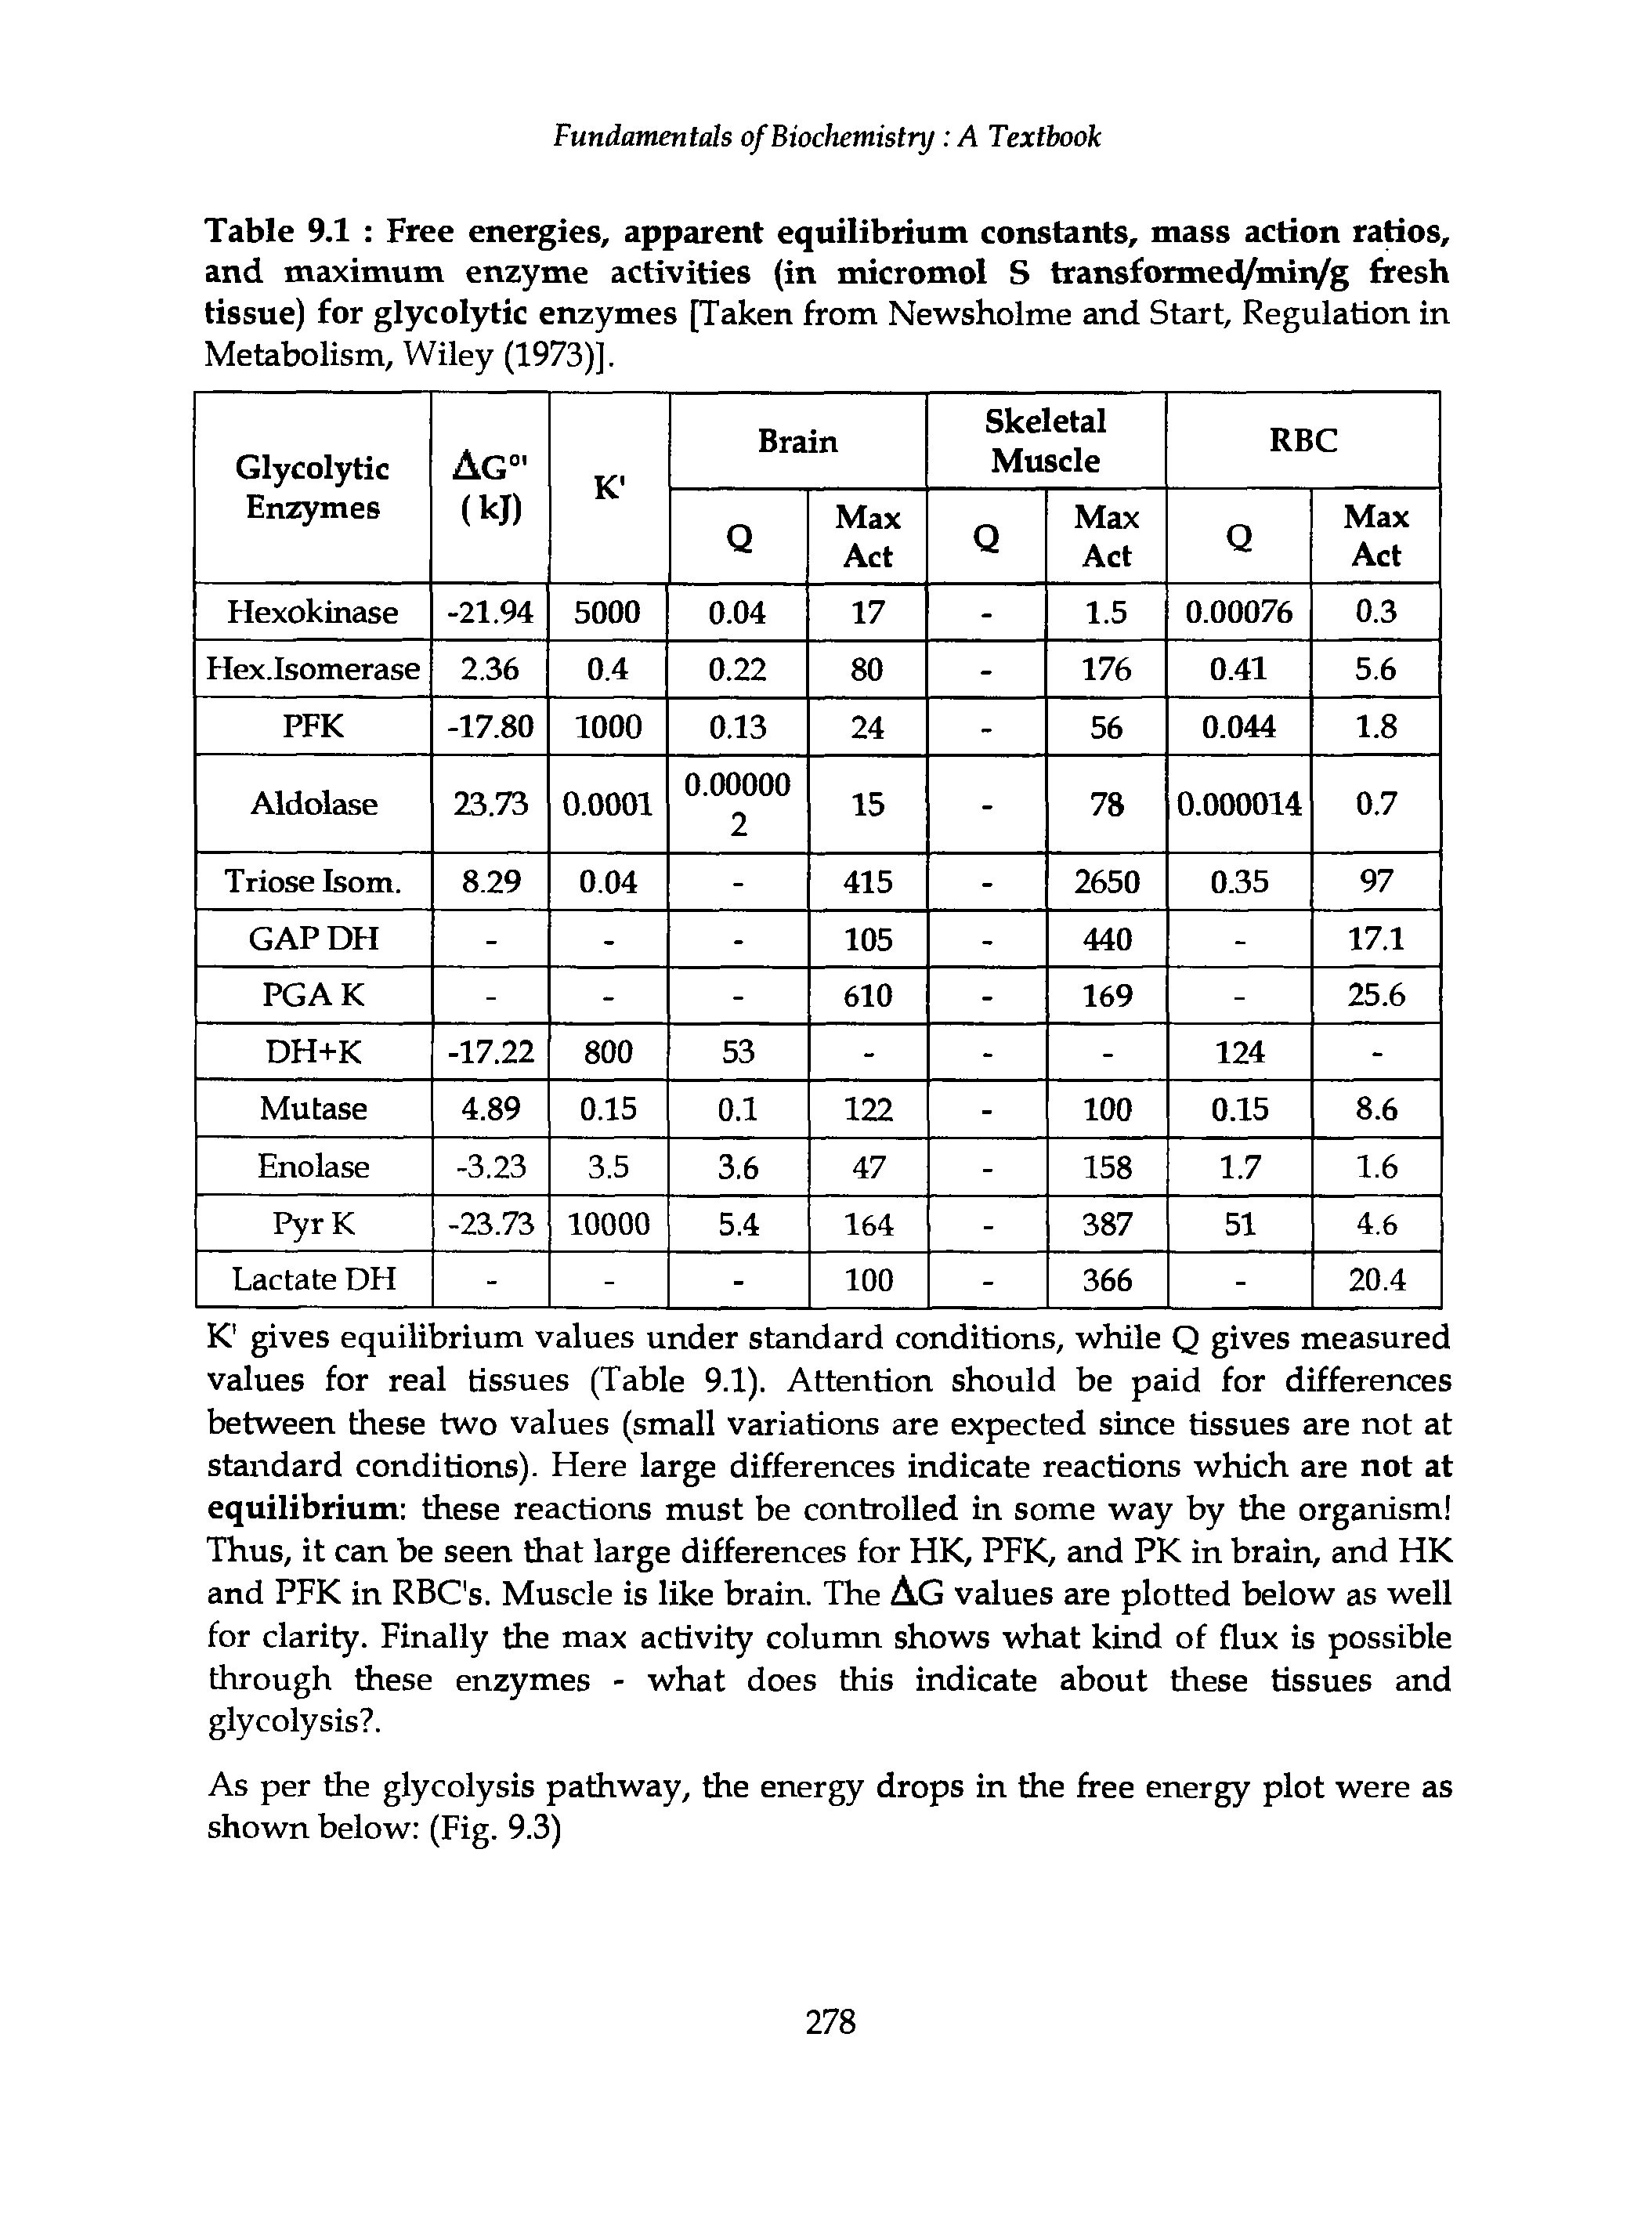 Table 9.1 Free energies, apparent equilibrium constants, mass action ratios, and maximum enzyme activities (in micromol S transformed/miiVg fresh tissue) for glycolytic enzymes [Taken from Newsholme and Start, Regulation in Metabolism, Wiley (1973)].